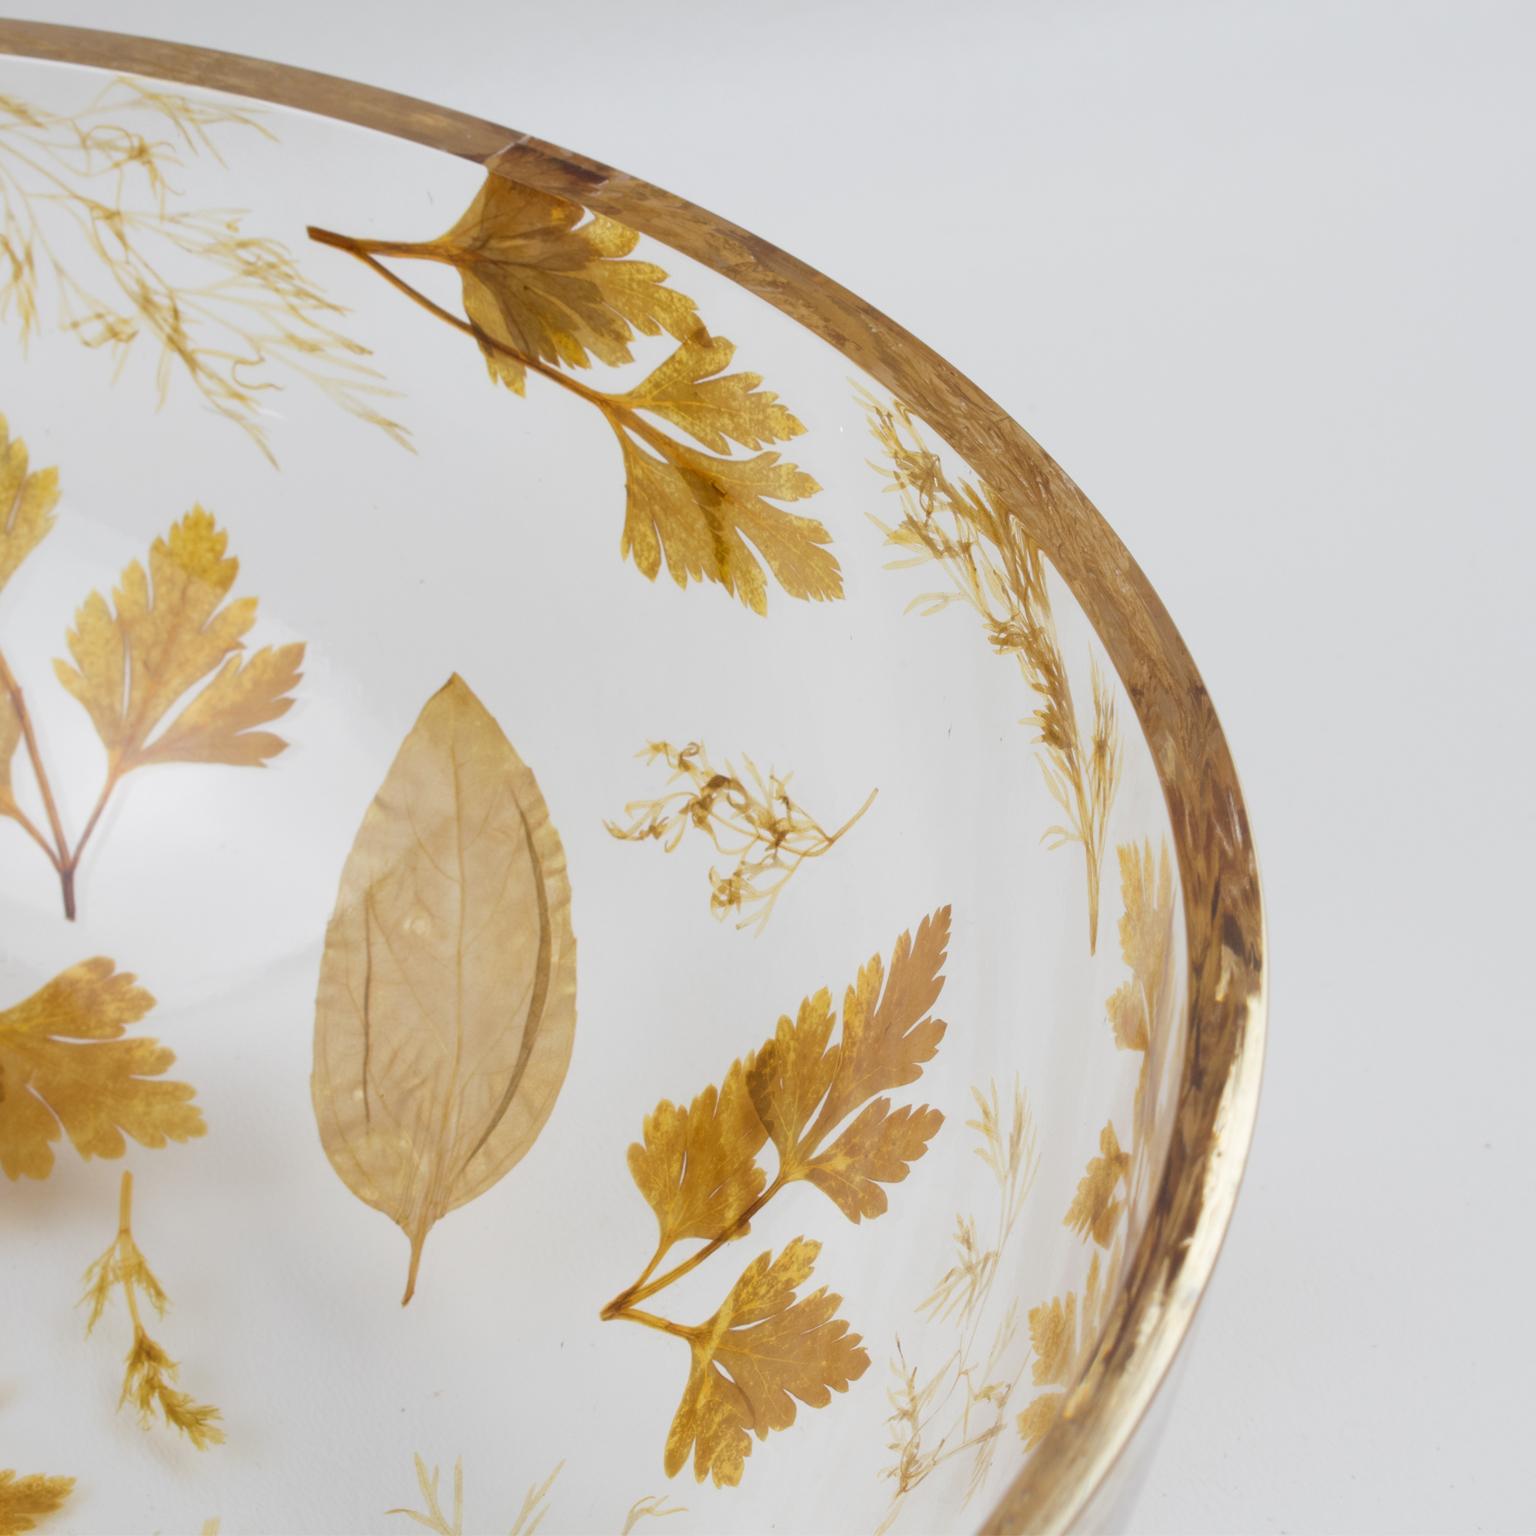 Late 20th Century Resin Centerpiece Serving Bowl with Leaves Inclusions, Italy 1970s